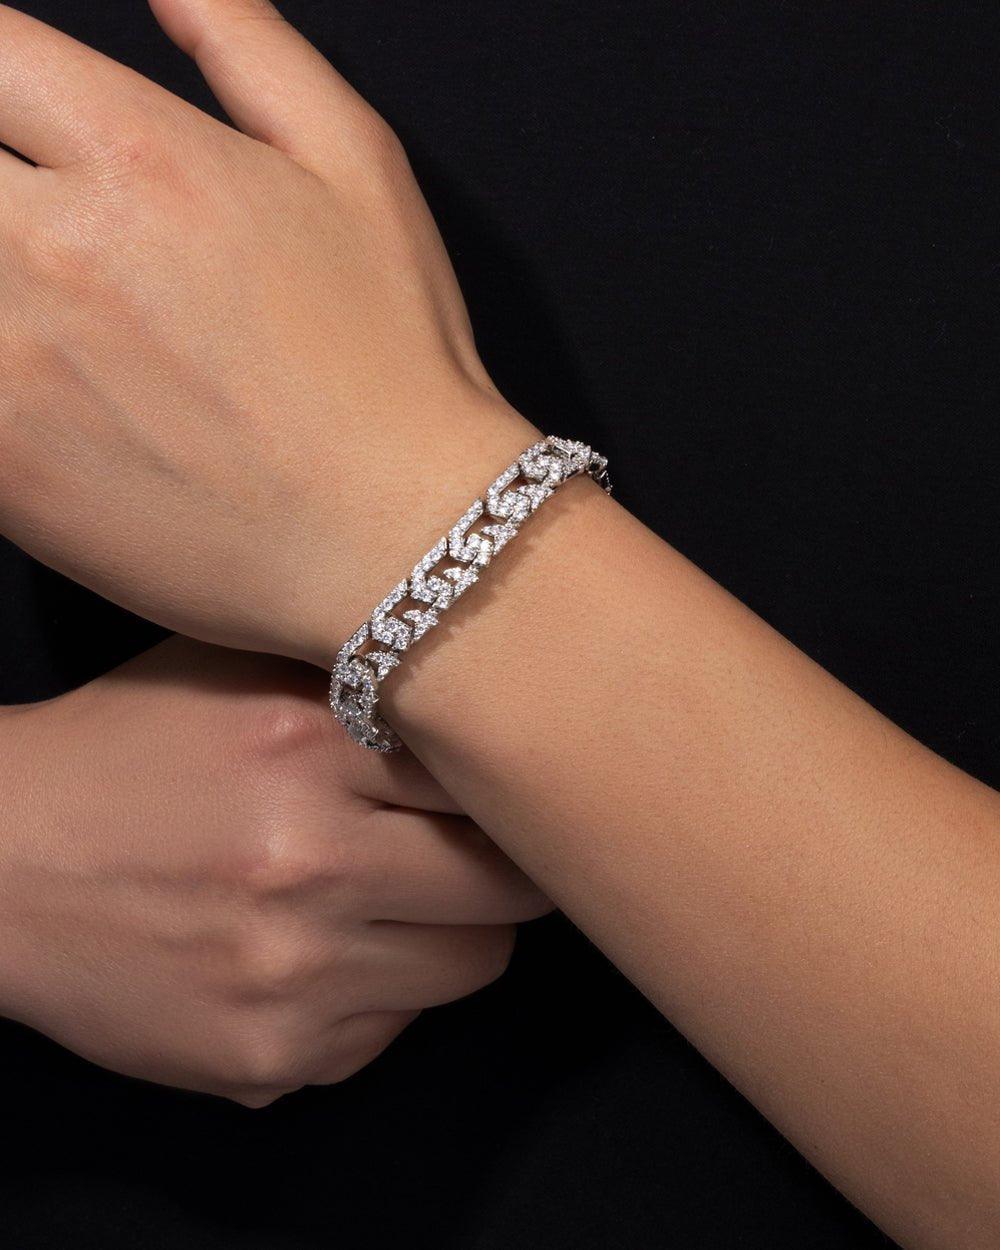 CHUNKY CUBAN BRACELET. - 10MM WHITE GOLD - DRIP IN THE JEWEL